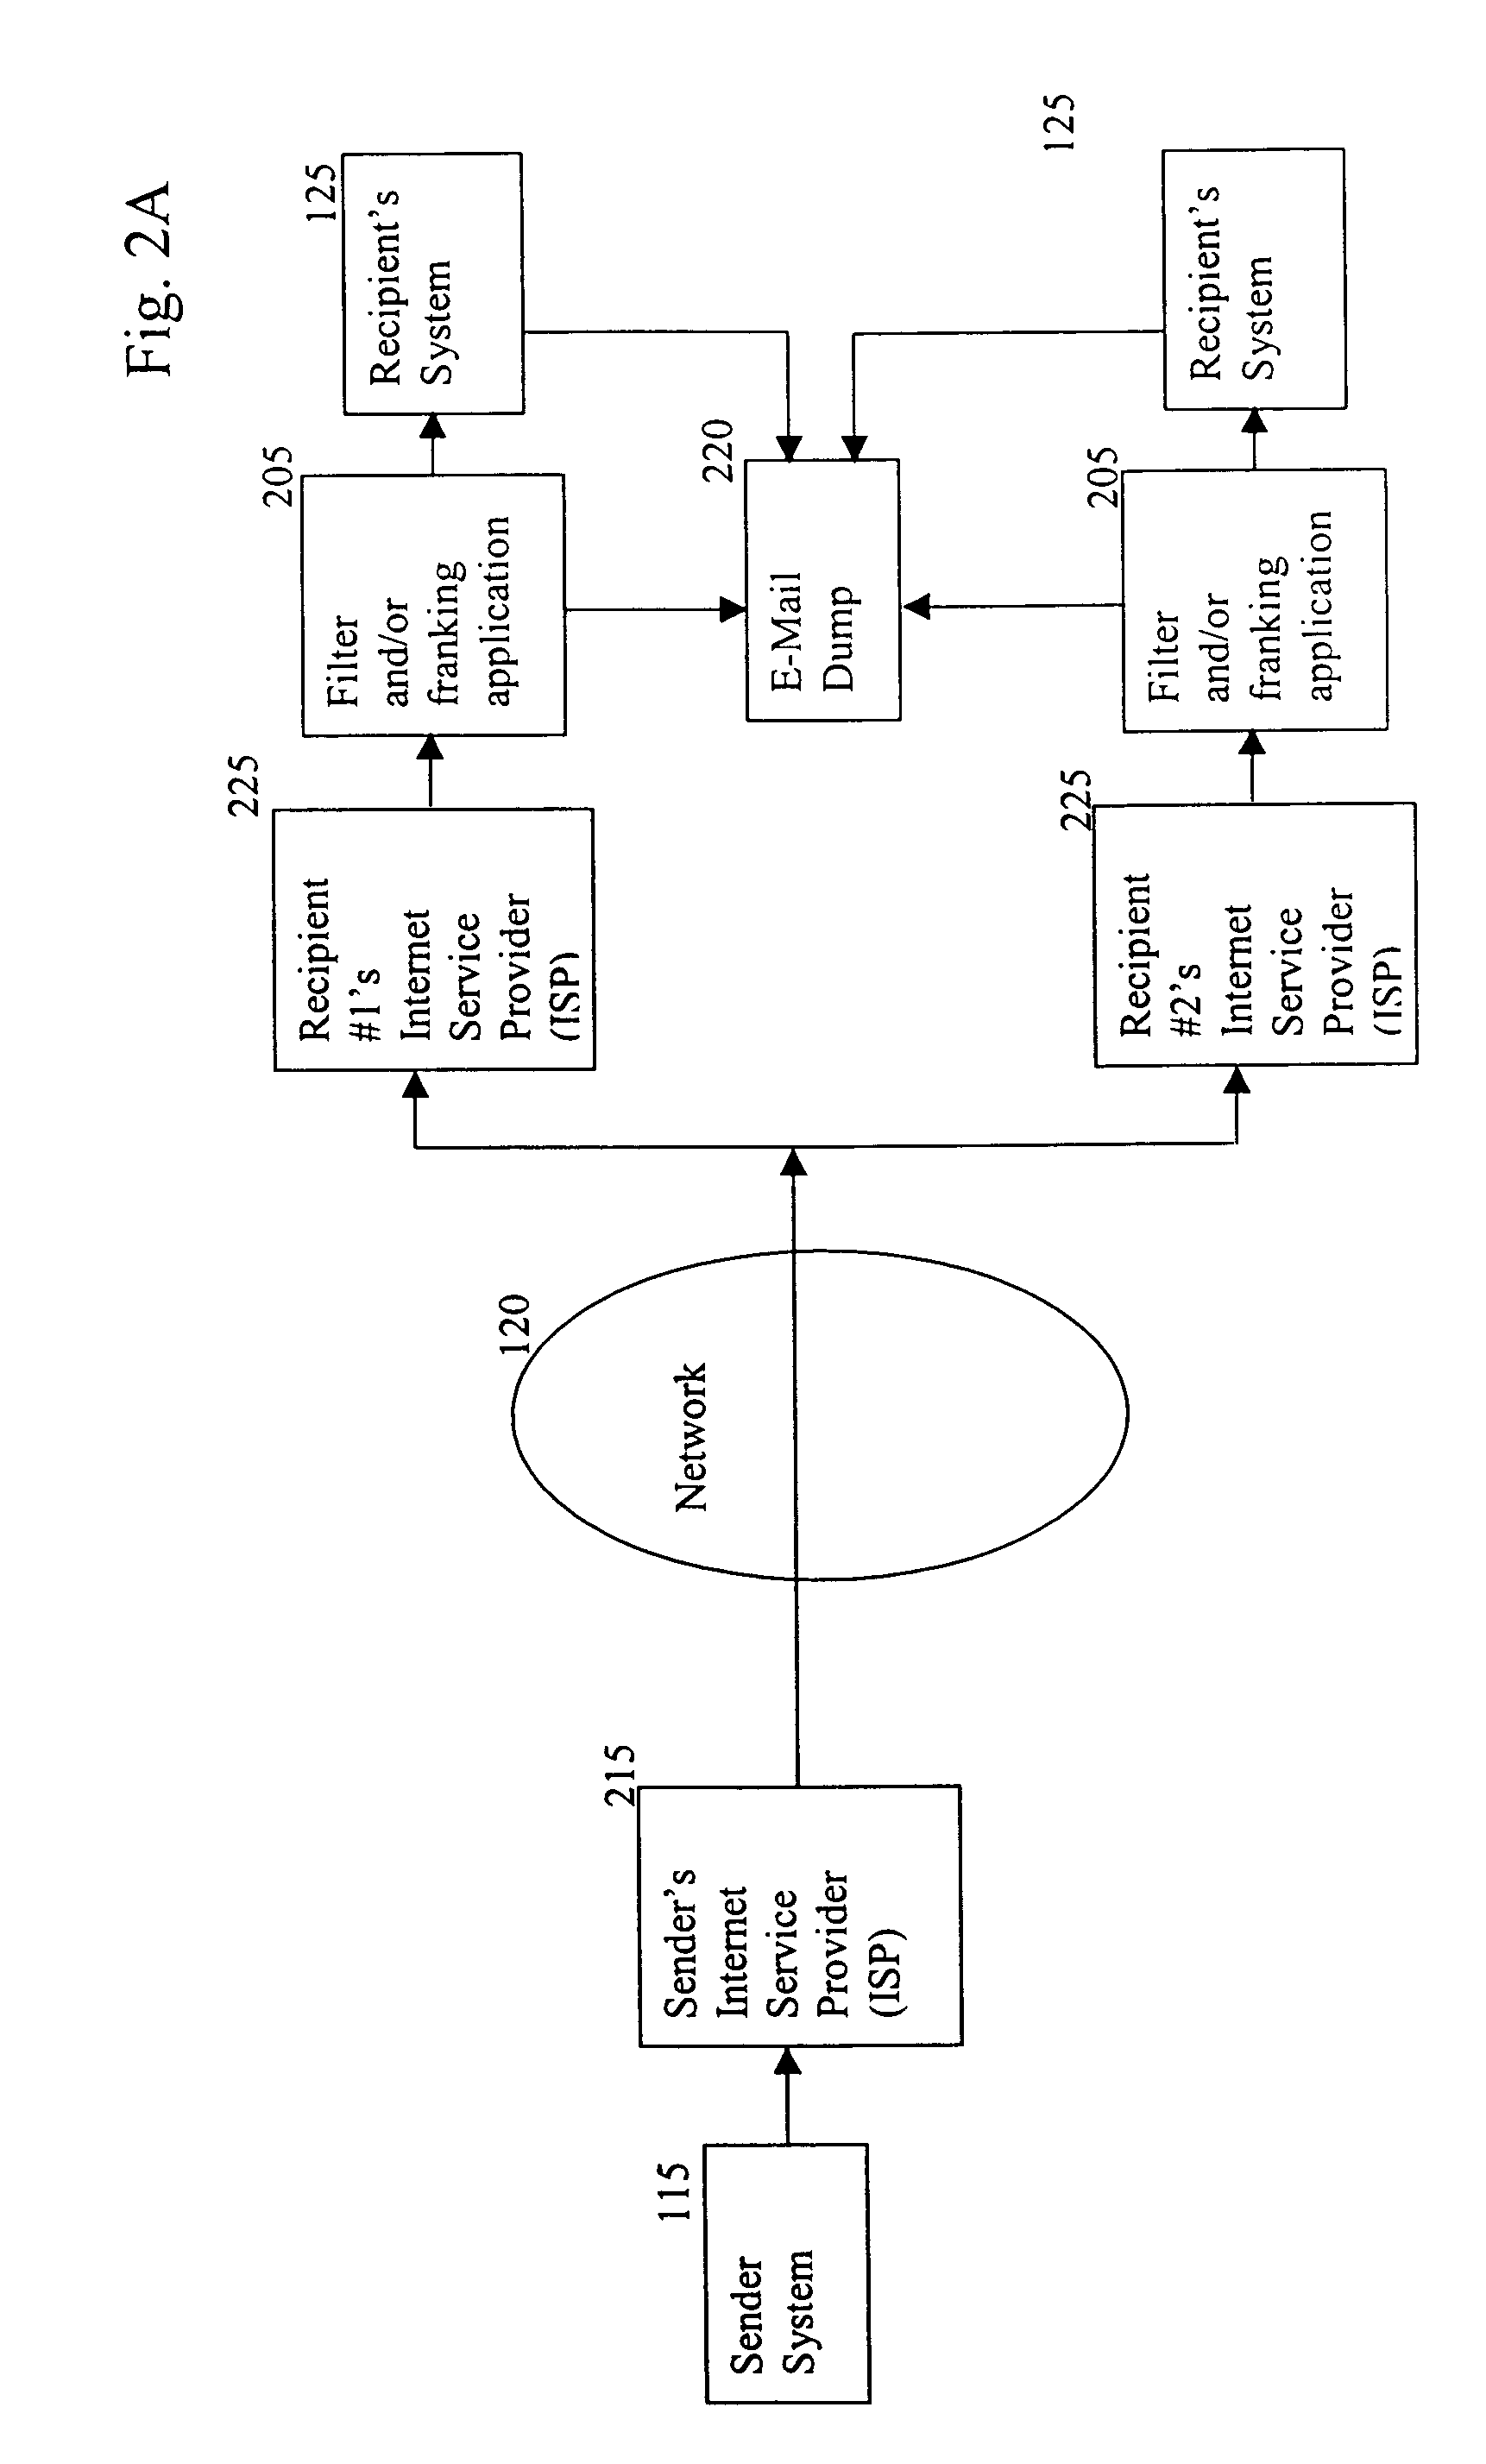 Method and apparatus for identifying, managing, and controlling communications